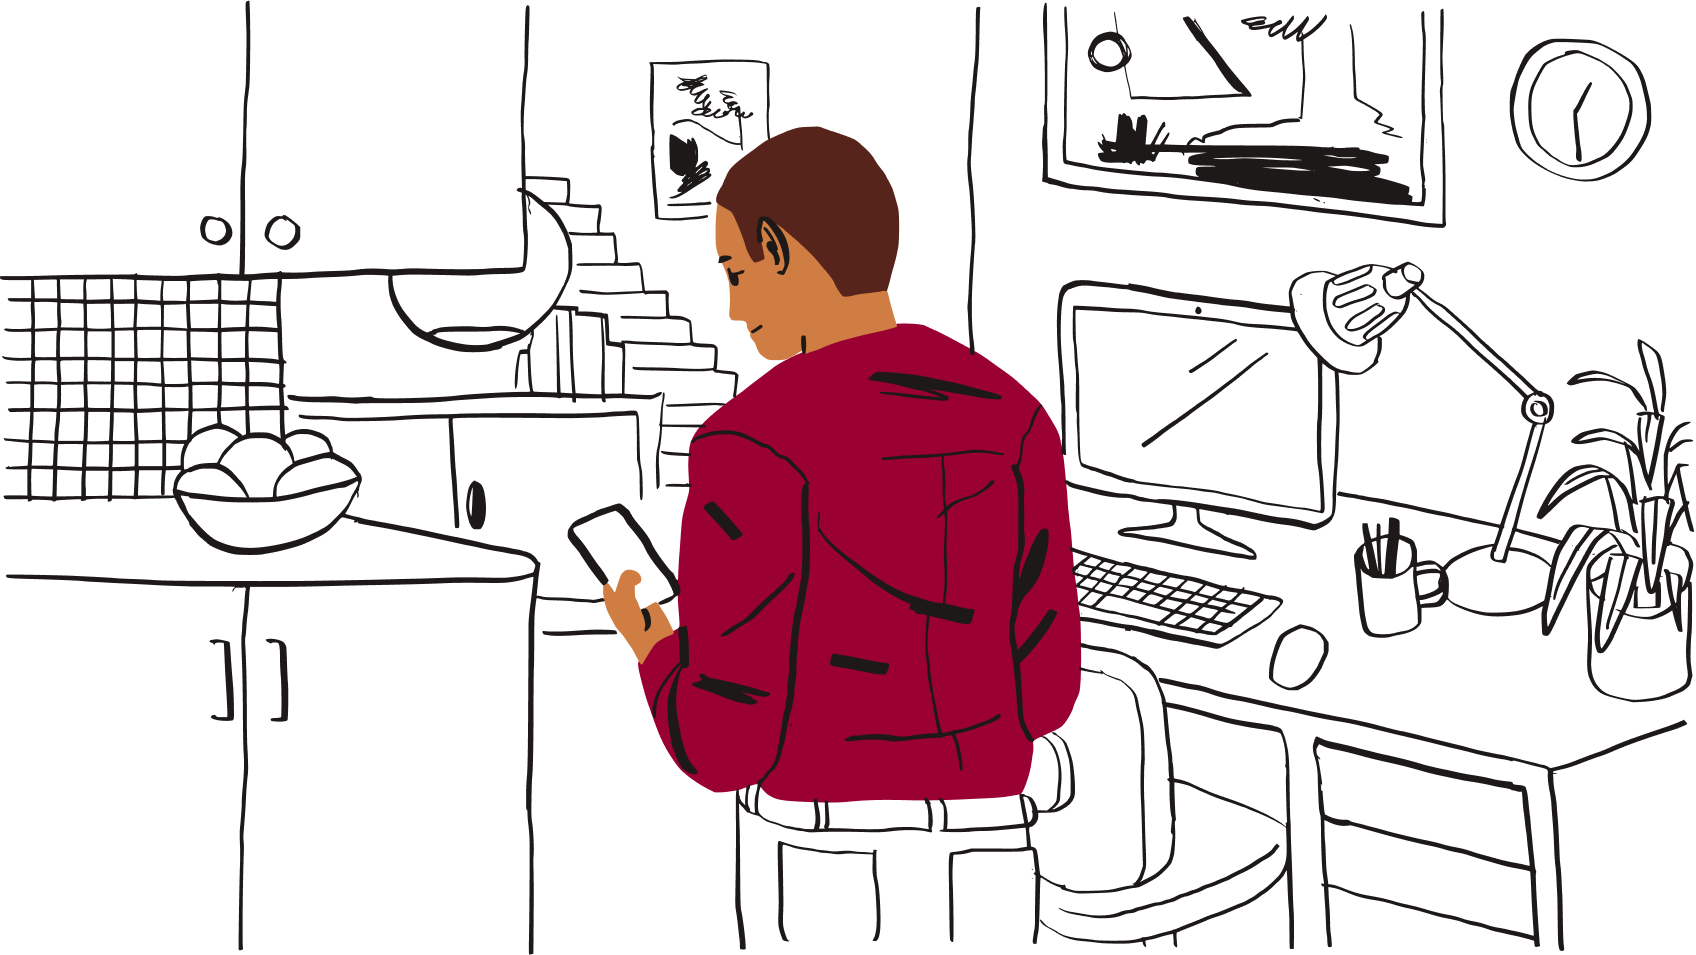 An illustration of a person with multiple devices looking reassured.